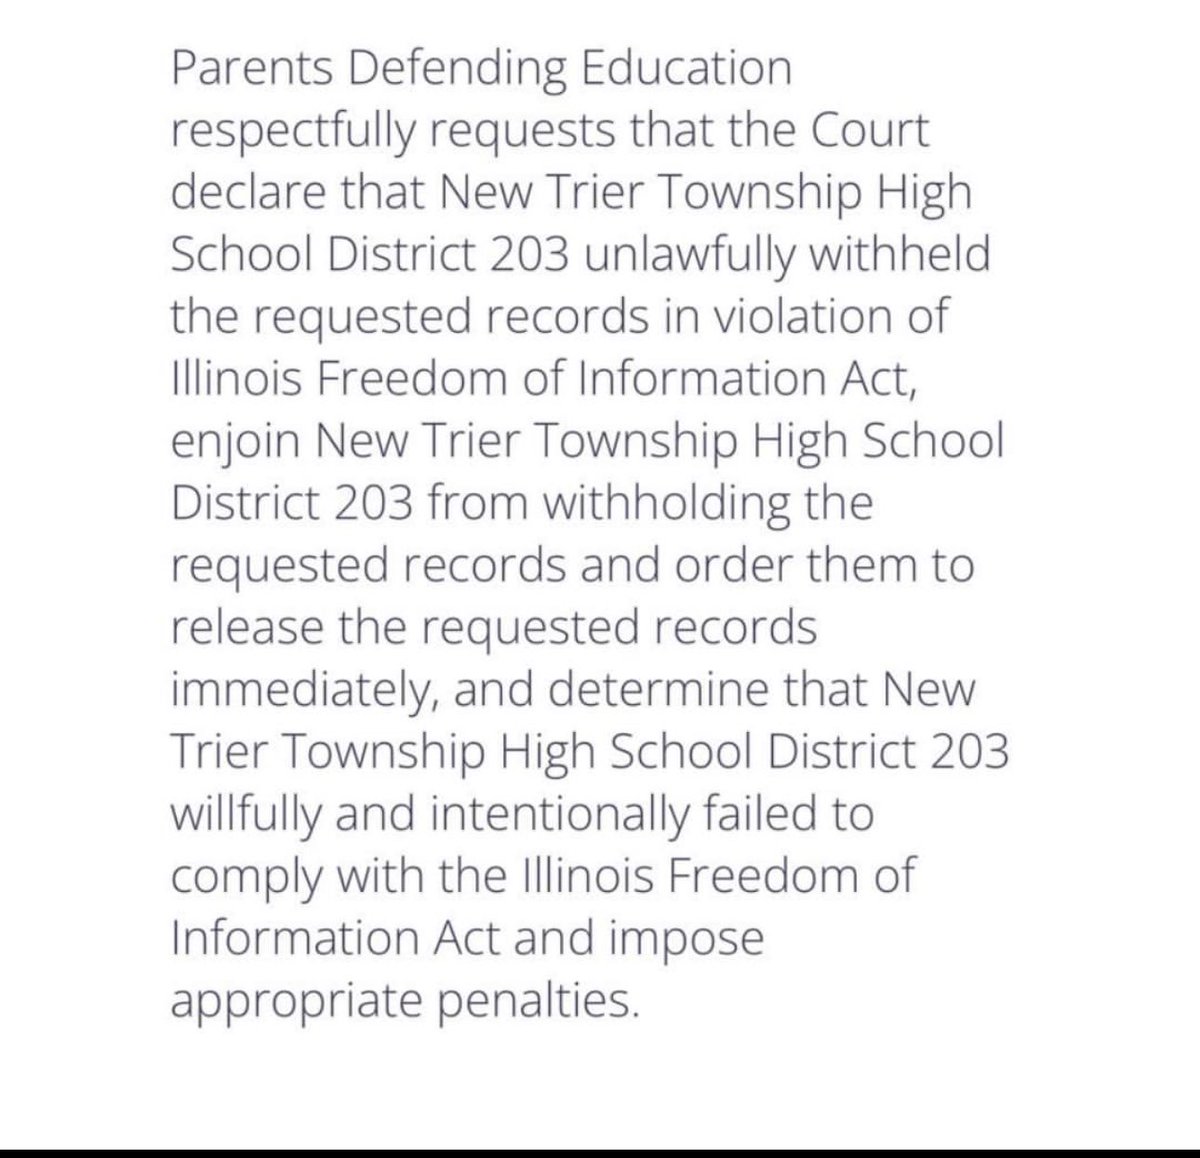 “@DefendingEd (PDE), a nationwide membership organization whose members oppose political indoctrination in America's schools, filed a complaint in the Circuit Court of Cook County, Illinois against @NewTrier203 High School District for unlawfully withholding records of the